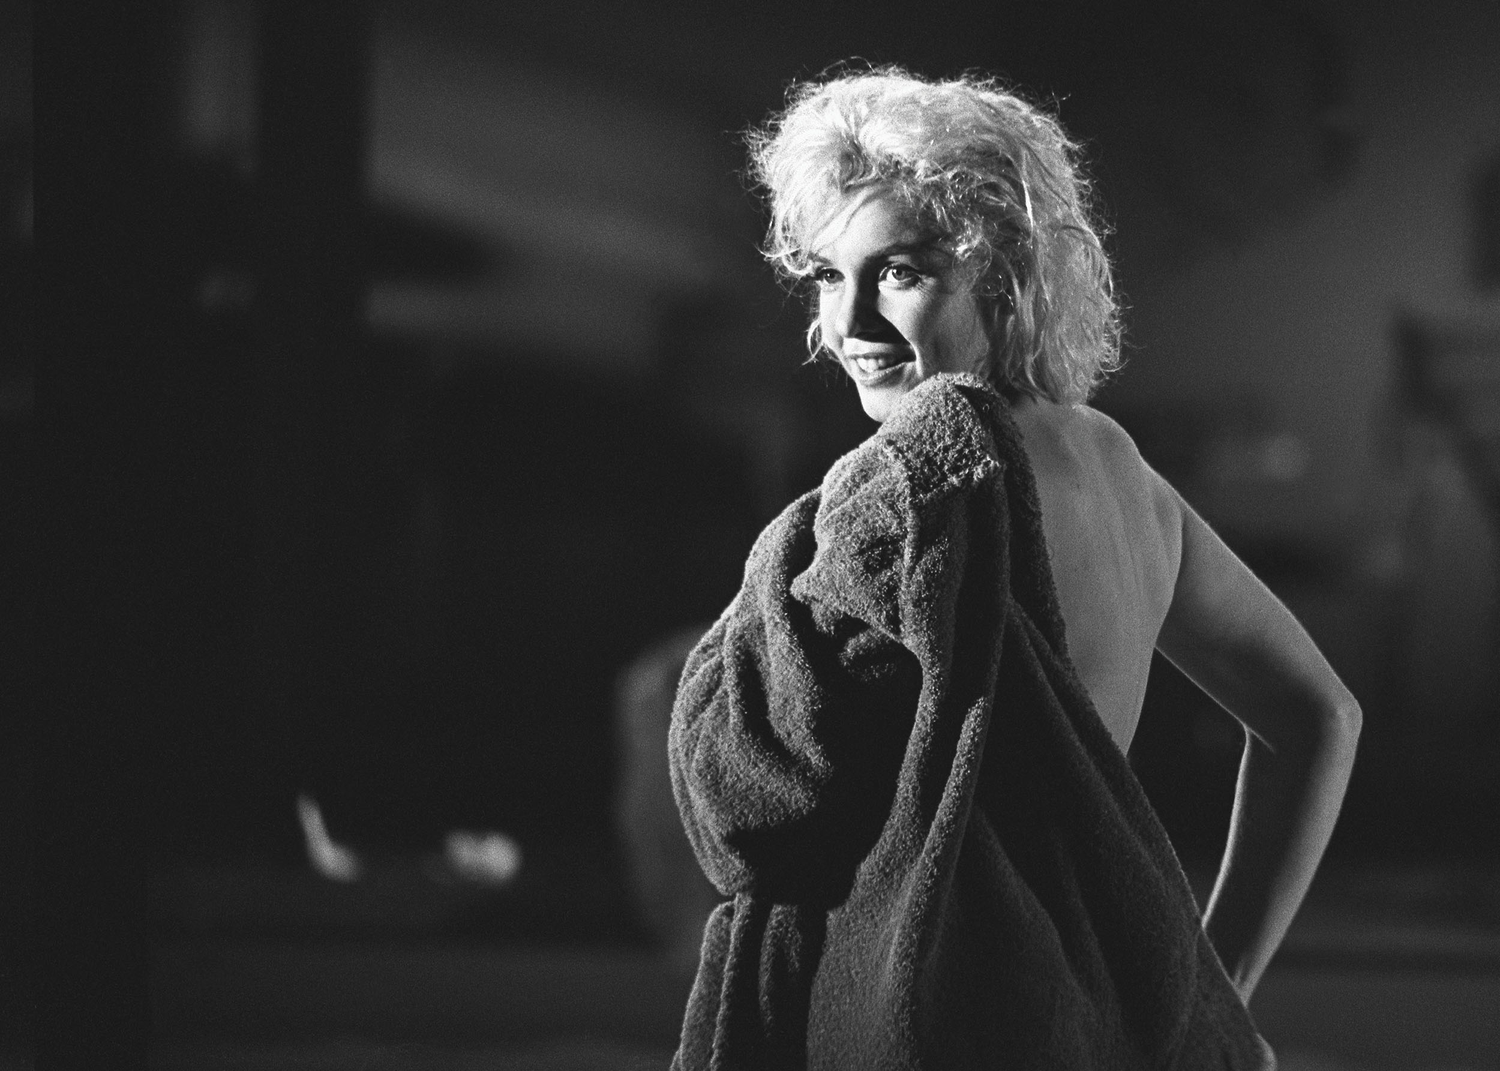 Marilyn Monroe Photograph Putting on a Robe by Lawrence Schiller, 24/75